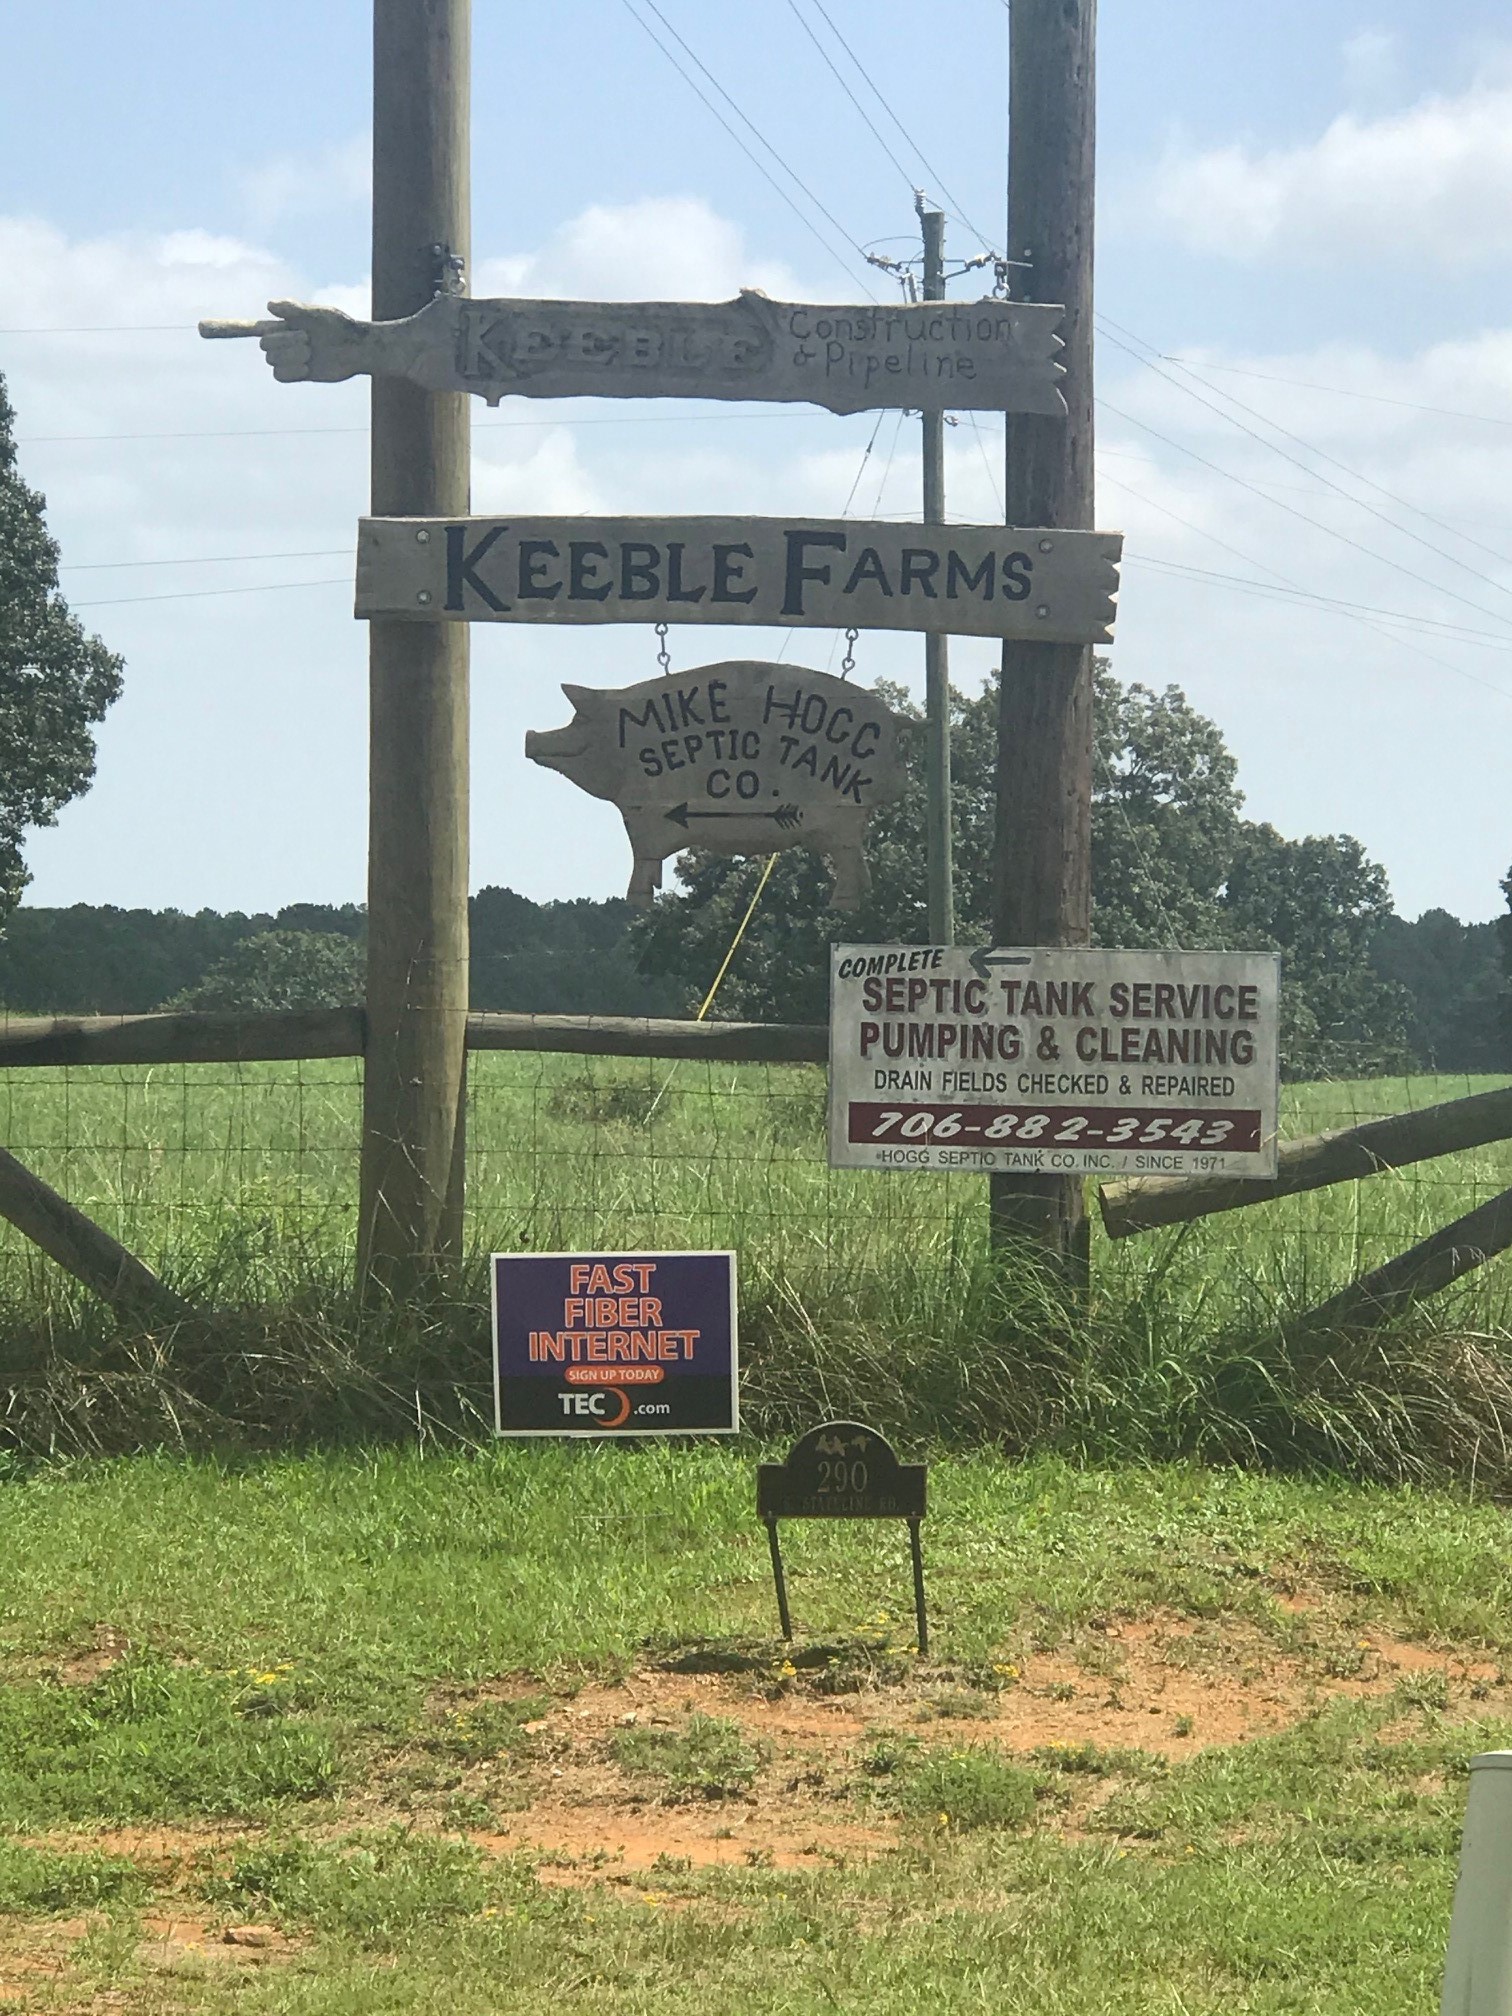 Keeble Farms in Five Points